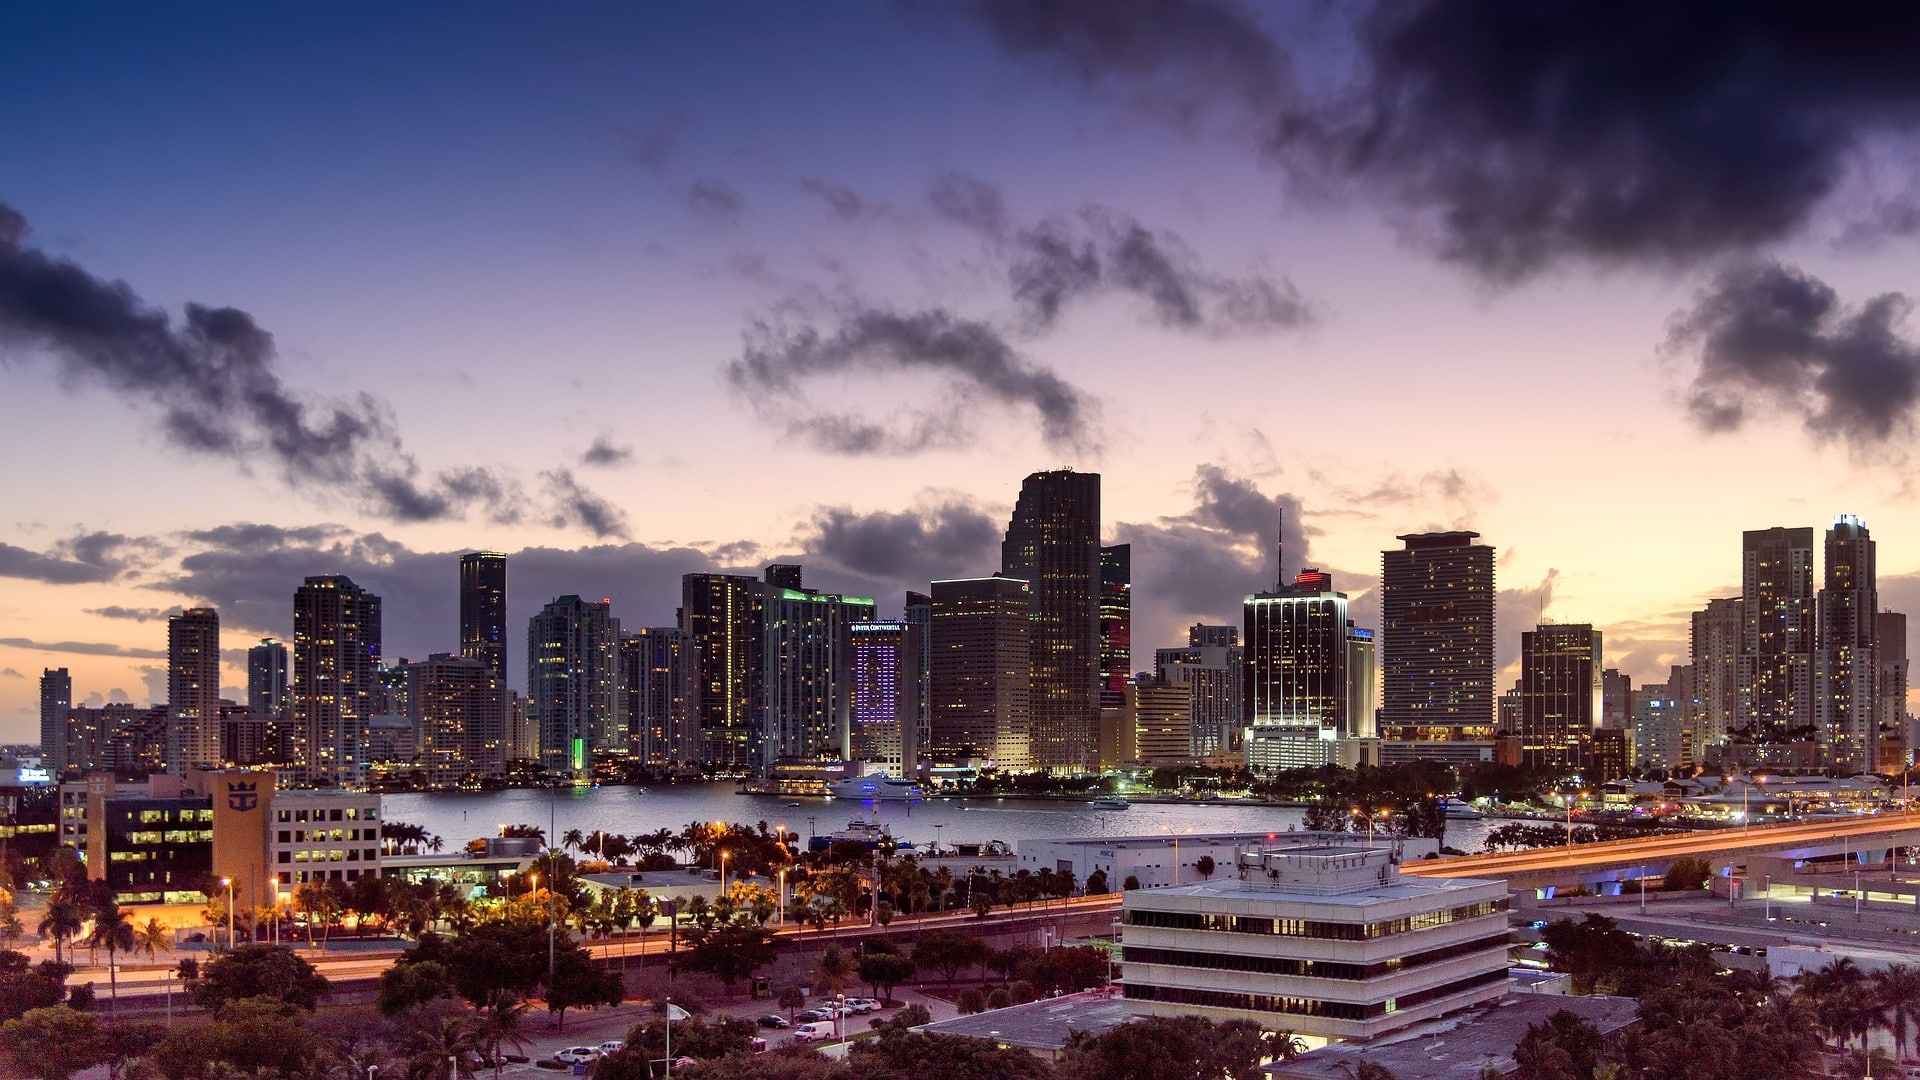 Miami is home to a language that combines English with Spanish in some cases.